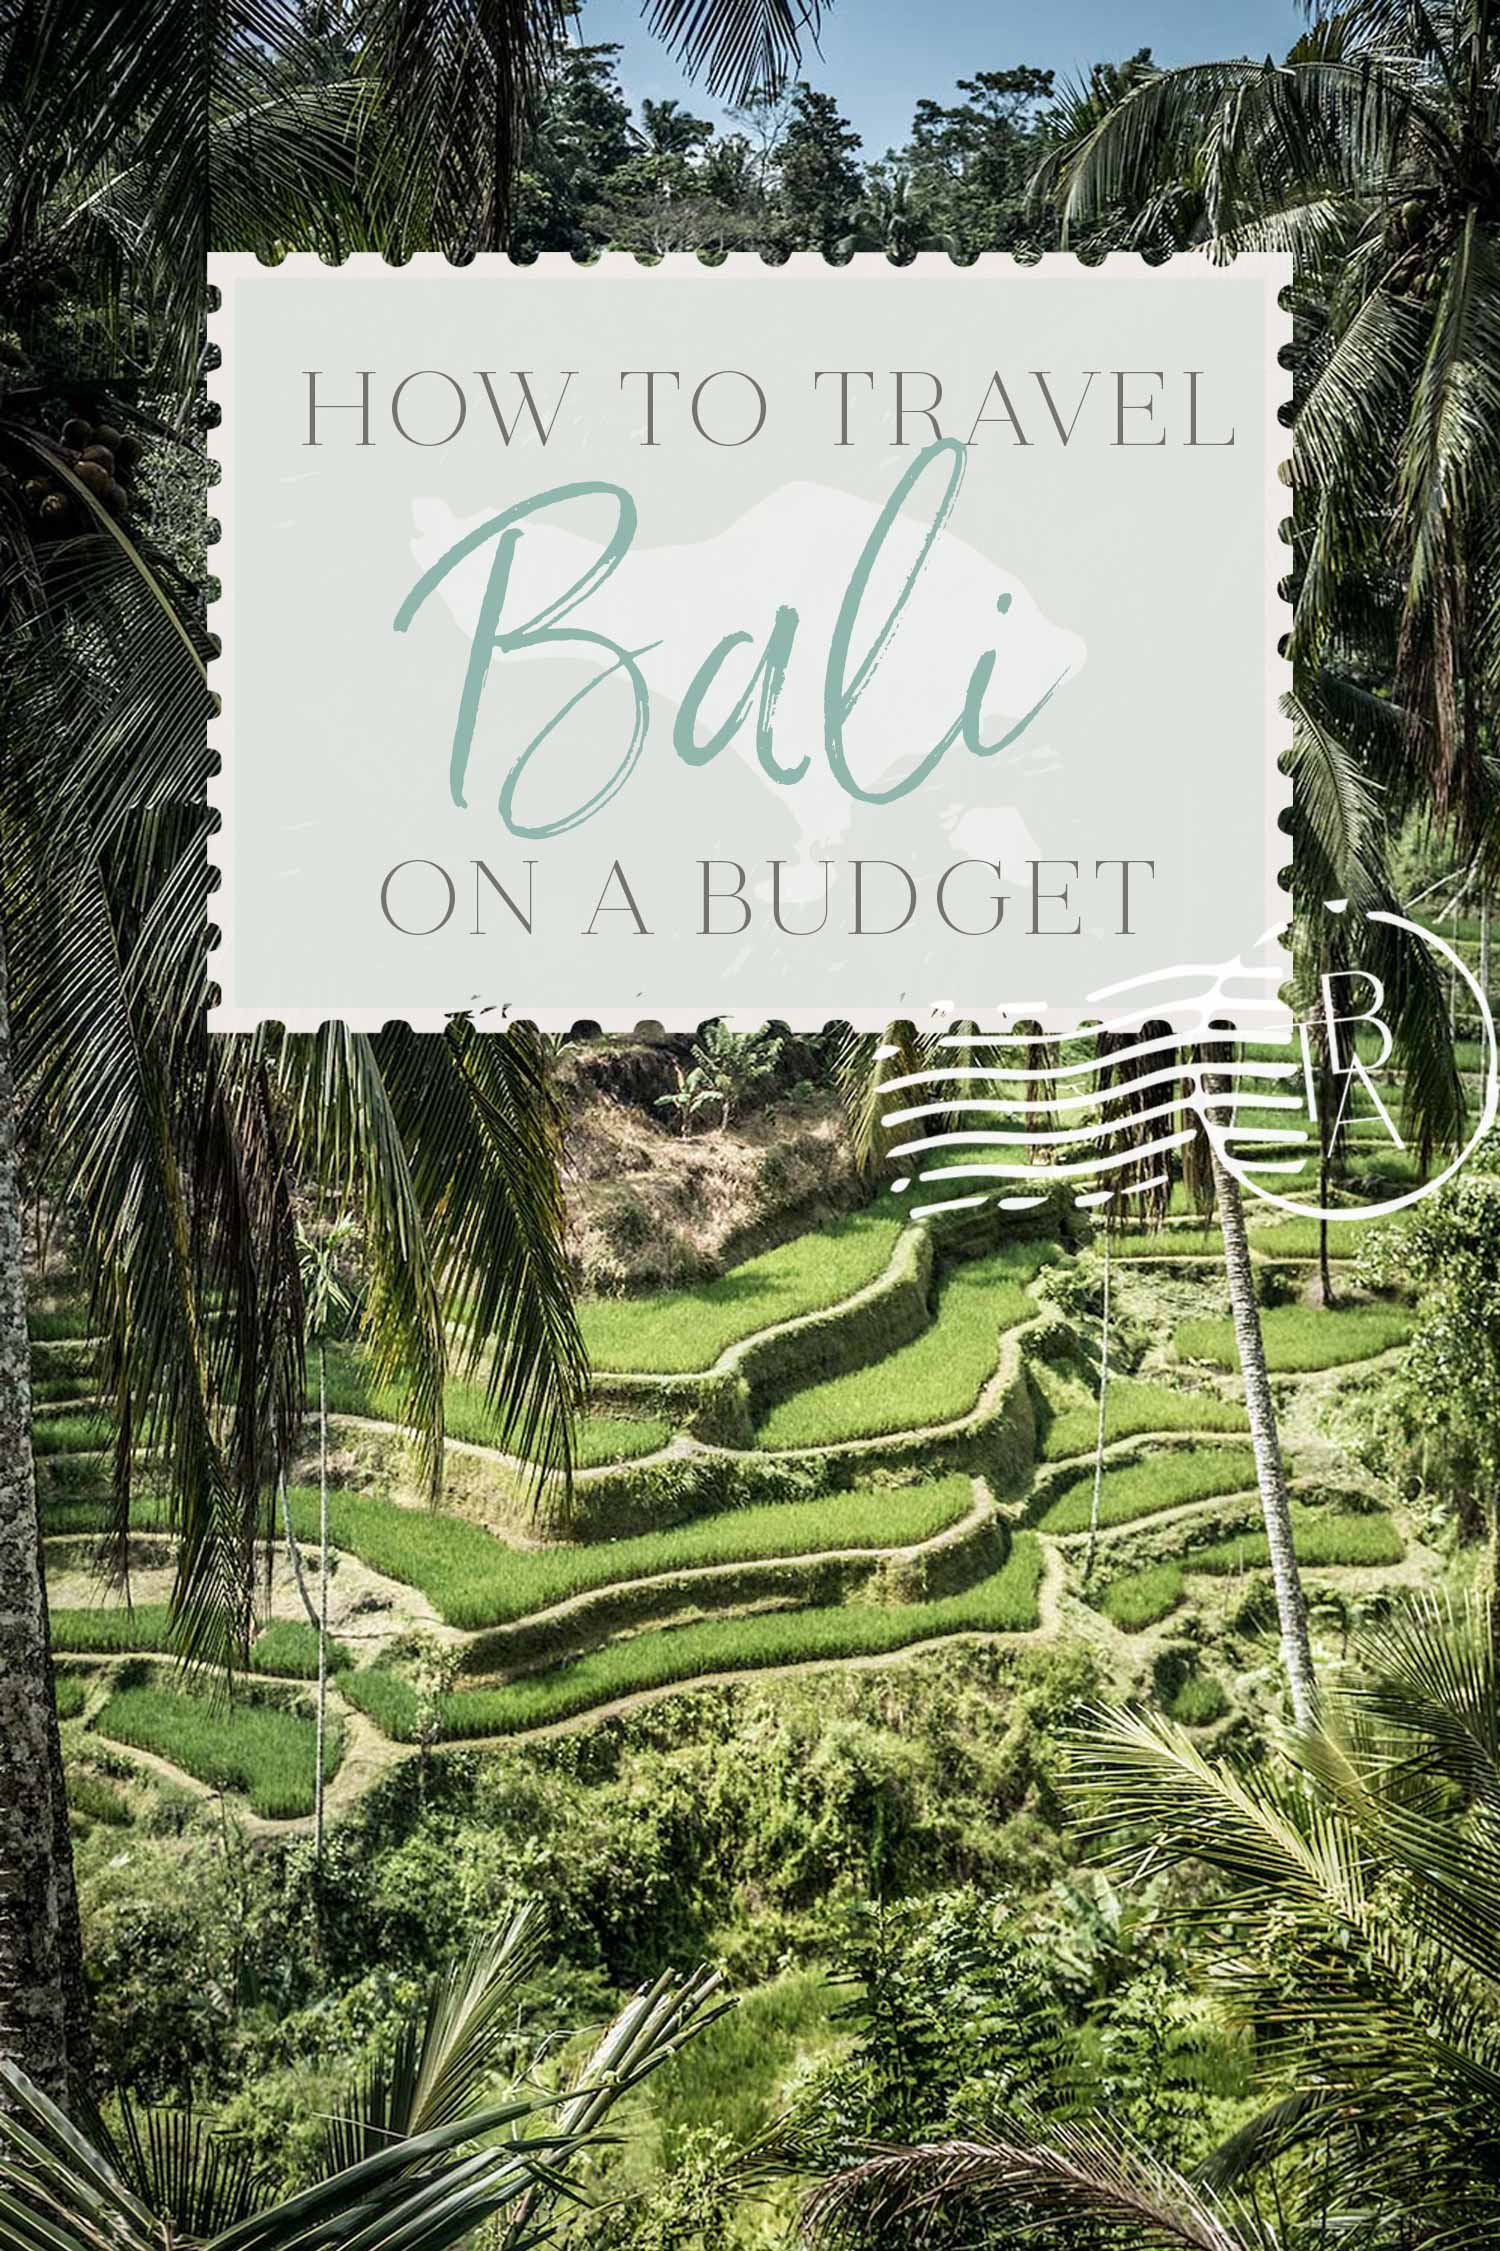 How to Travel Bali on a Budget